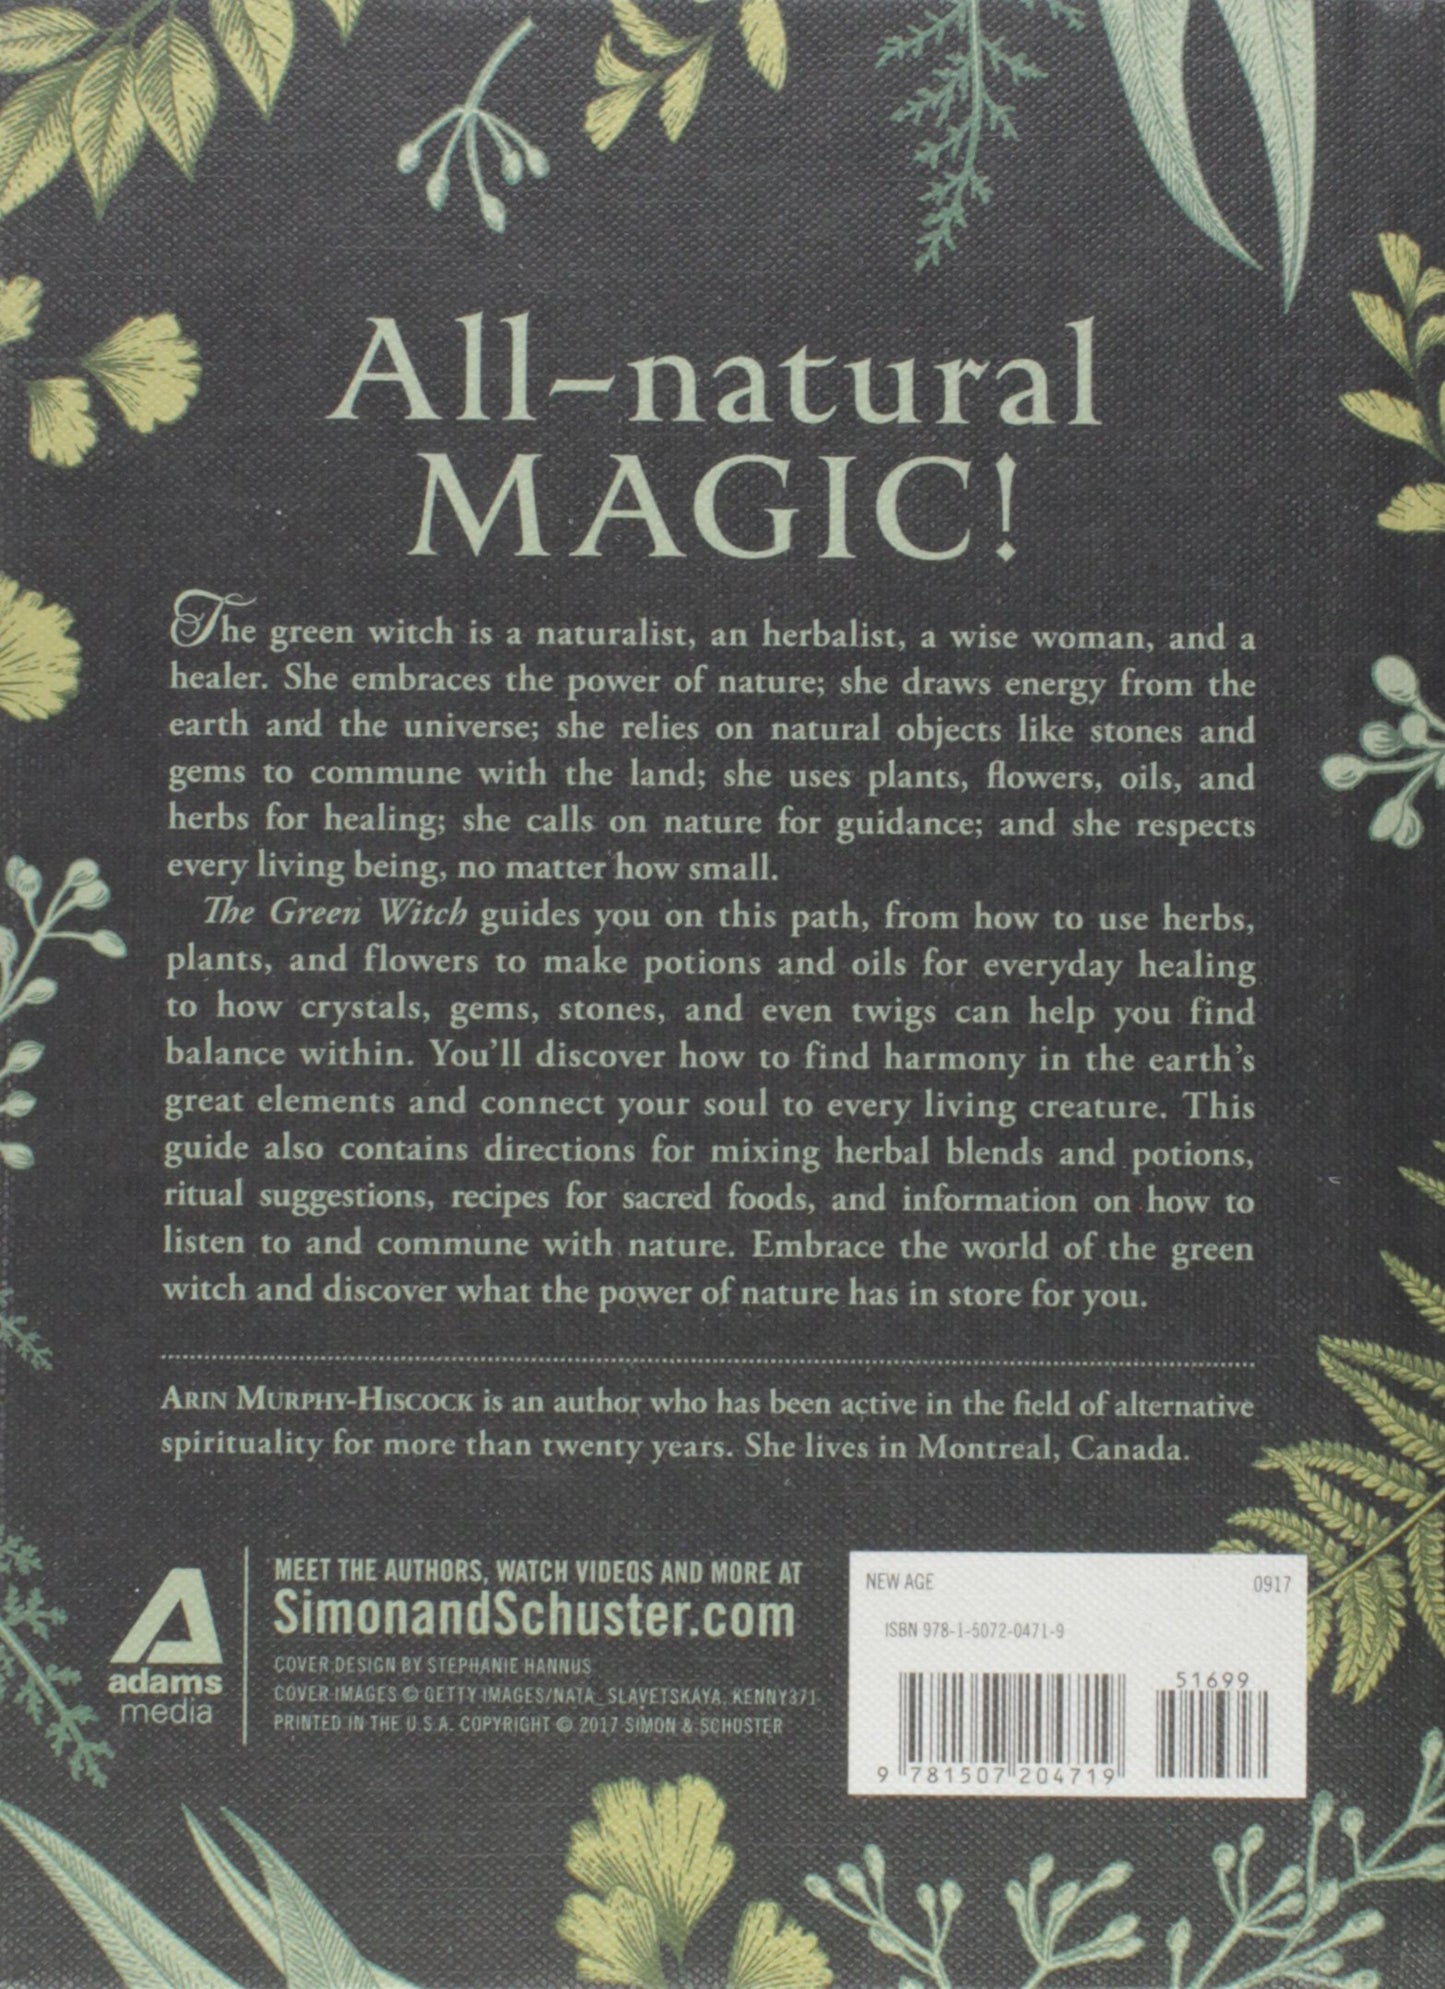 The Green Witch, Your Complete Guide to The Natural Magic of Herbs, Flowers, Essential Oils, and More by Arin Murphy-Hiscock